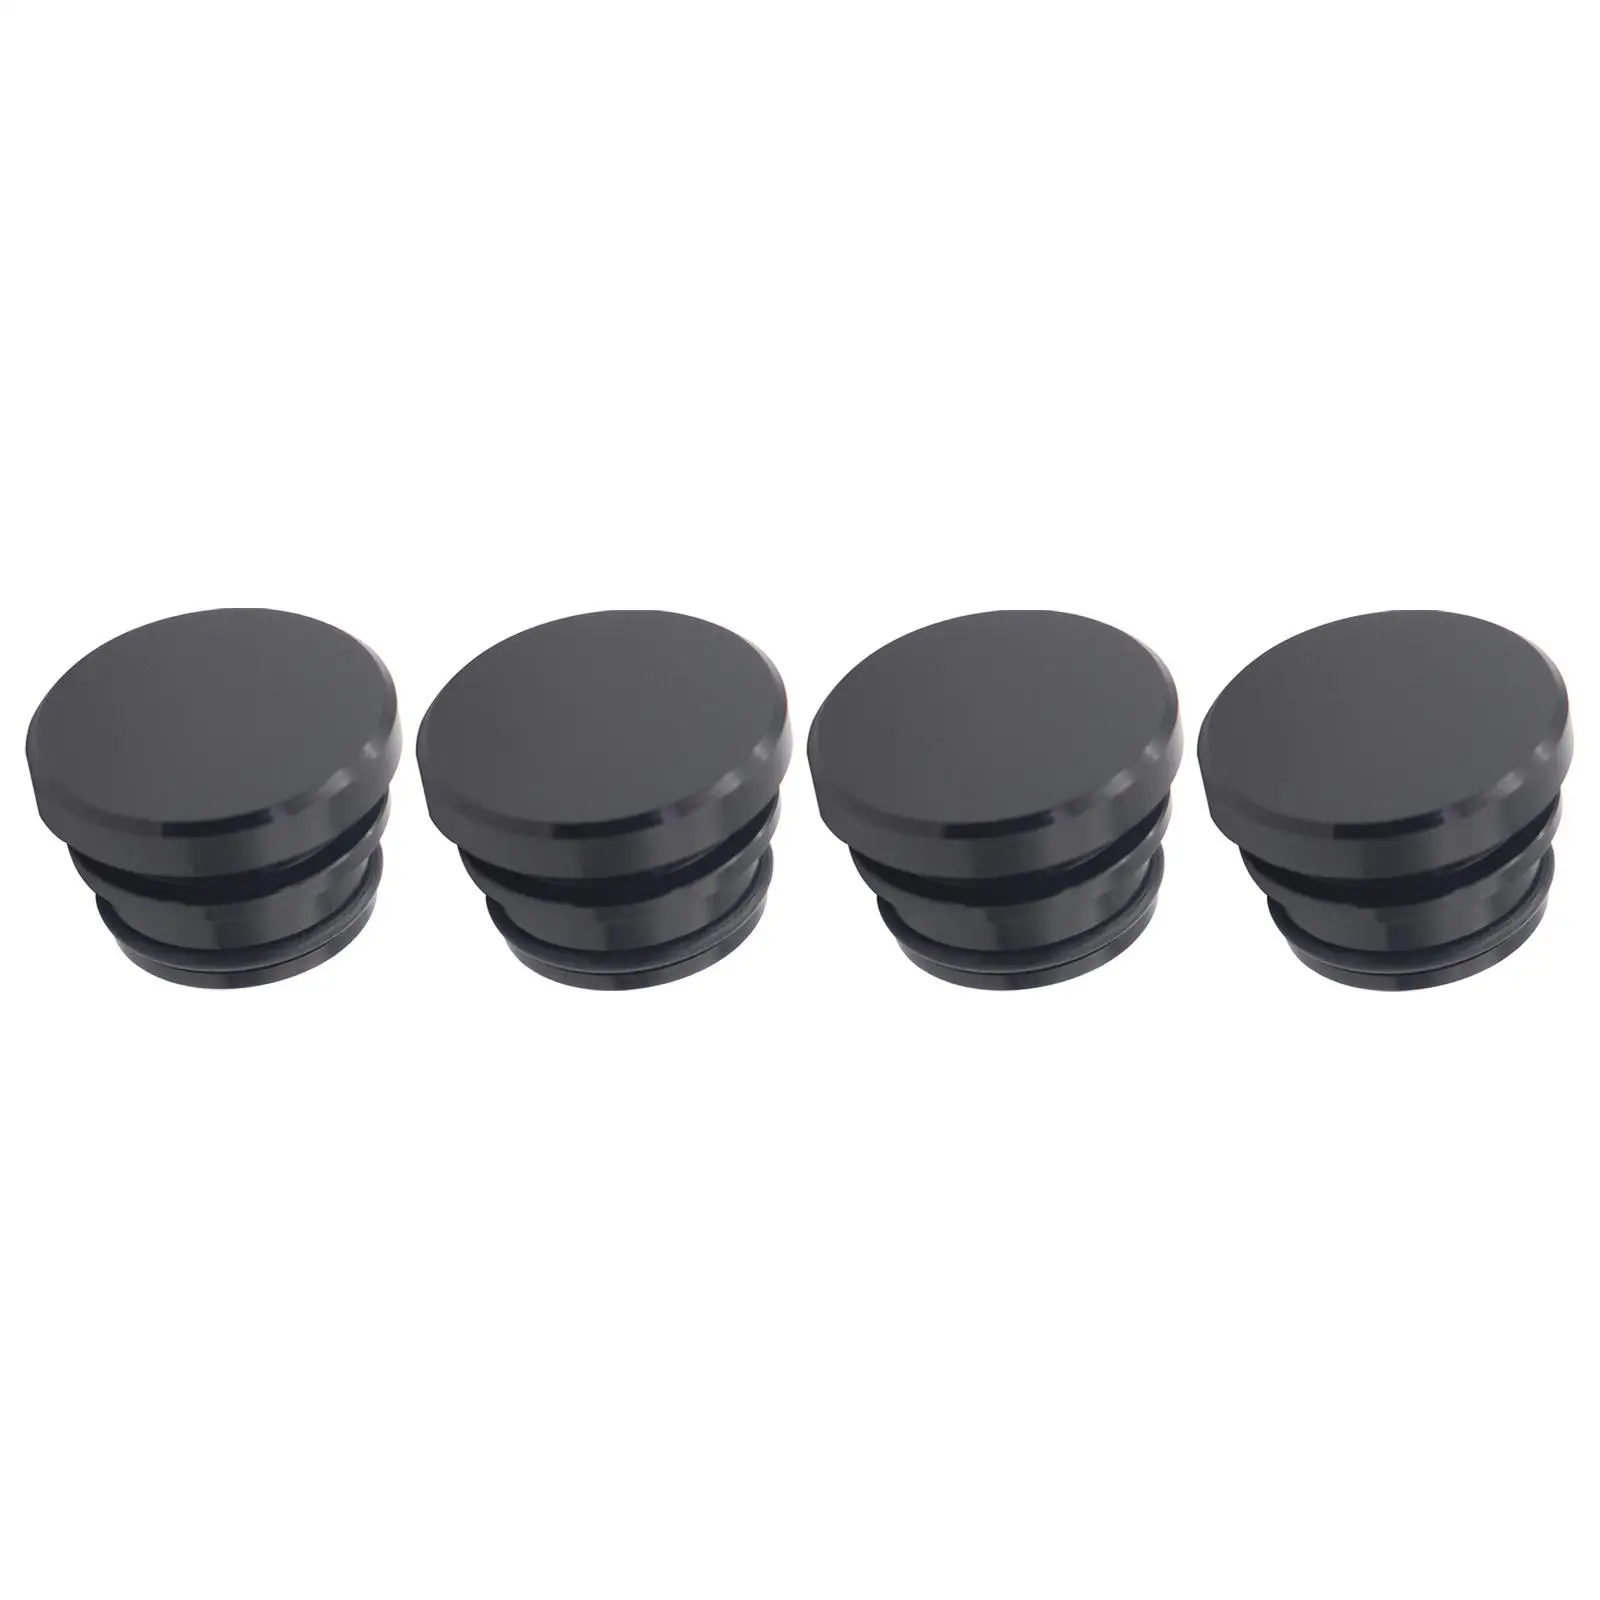 4x Cigarette Lighter Cover Cap Dustproof Replacement Easy Installation Quality Professional Car Accessories for Truck Car